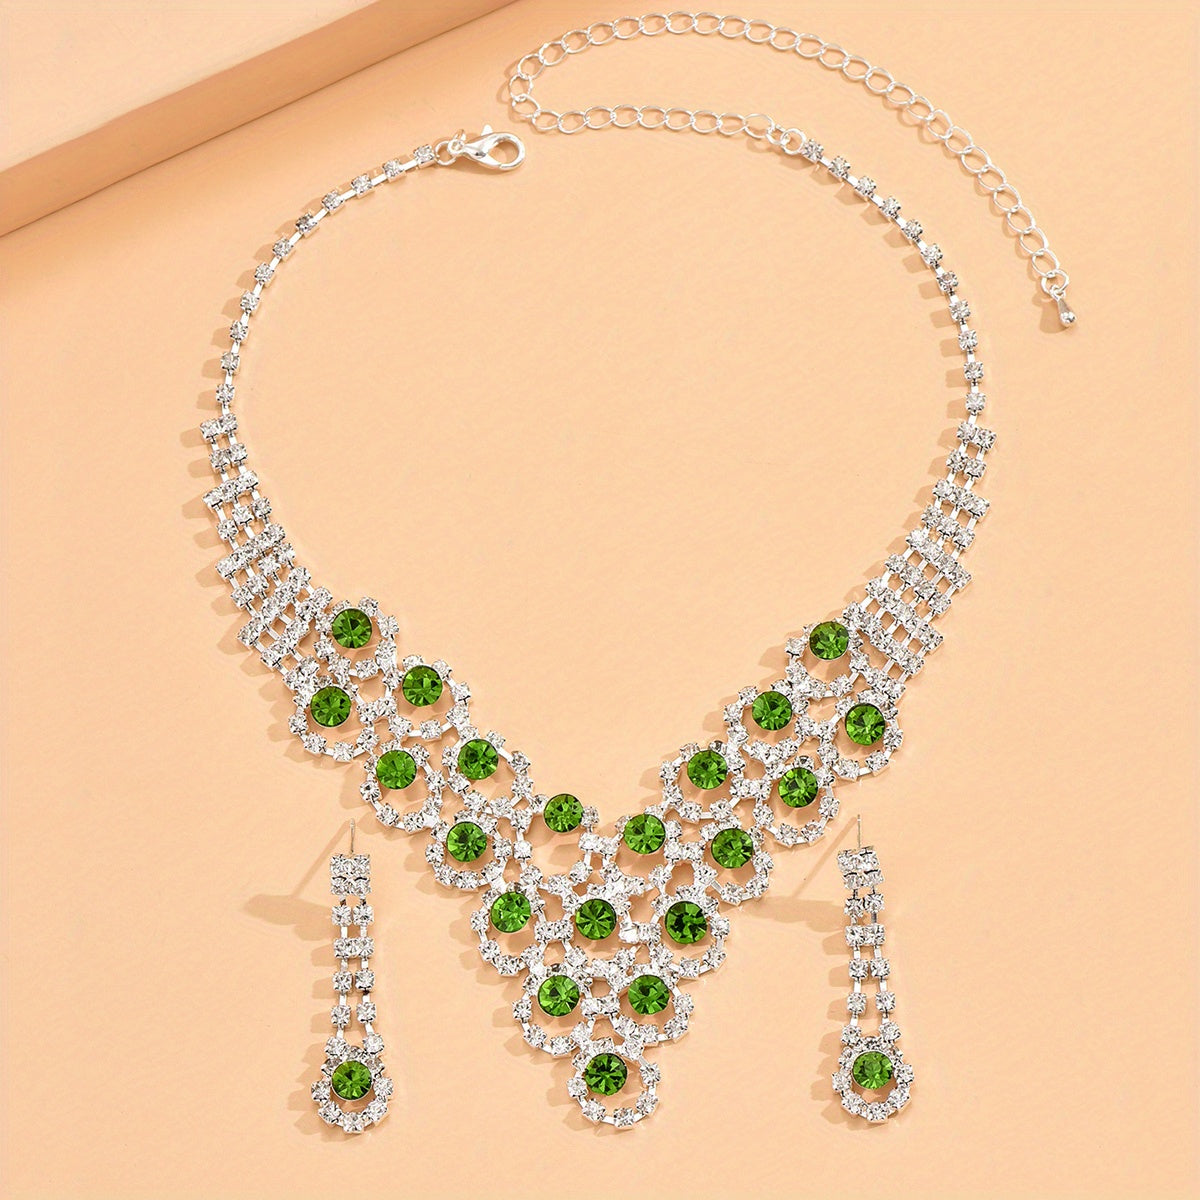 3pcs Elegant Silver Plated Rhinestone Jewelry Set for Evening and Cocktail Parties